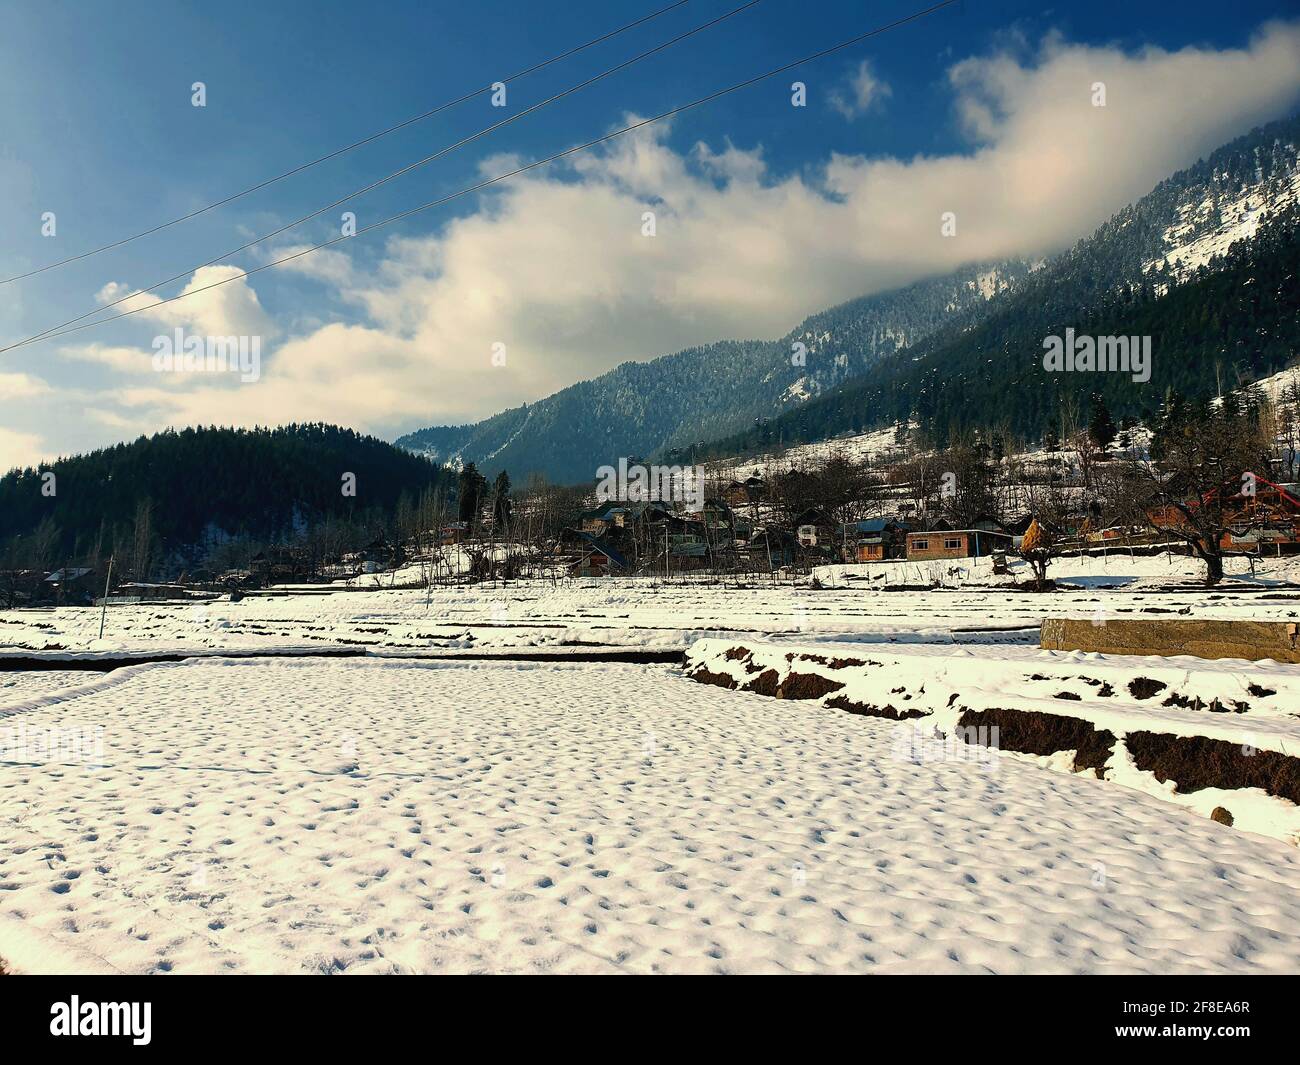 Snowcapped peaks, clear blue skies, barren mountains with meandering rivers, Kashmir is picturesque. Scenic Beauty. Stock Photo